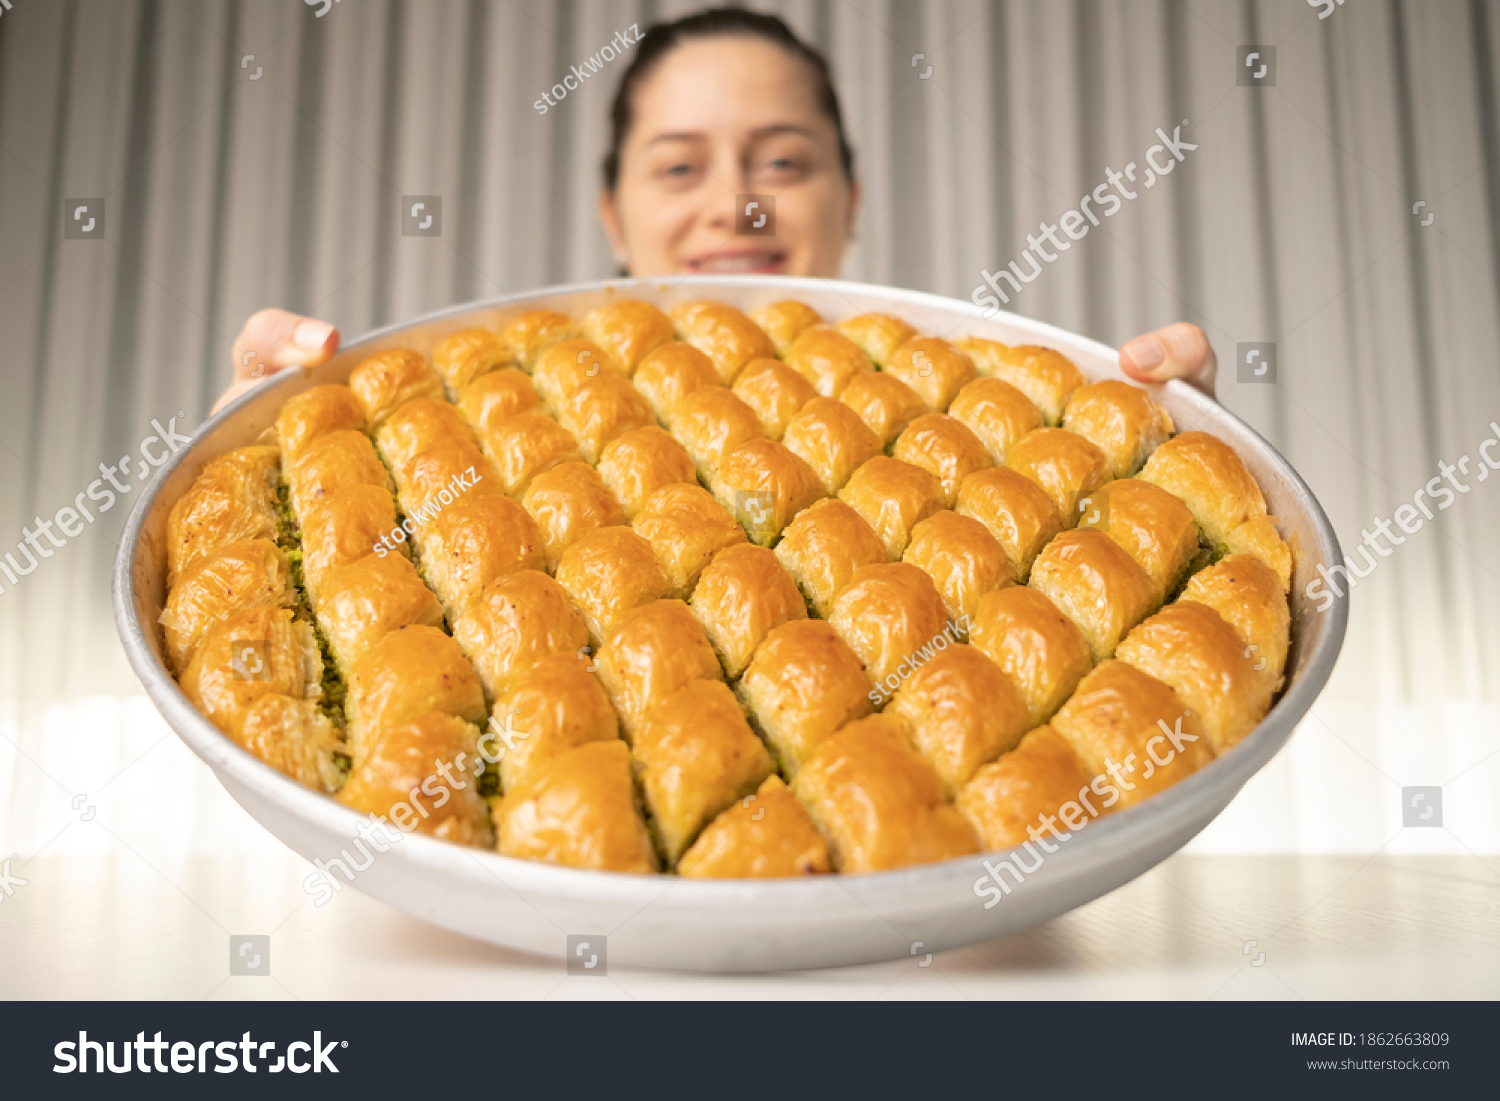 Close detail shot of a tray of crispy baklava dessert in the background smiling woman holding the tray in her hand #1862663809